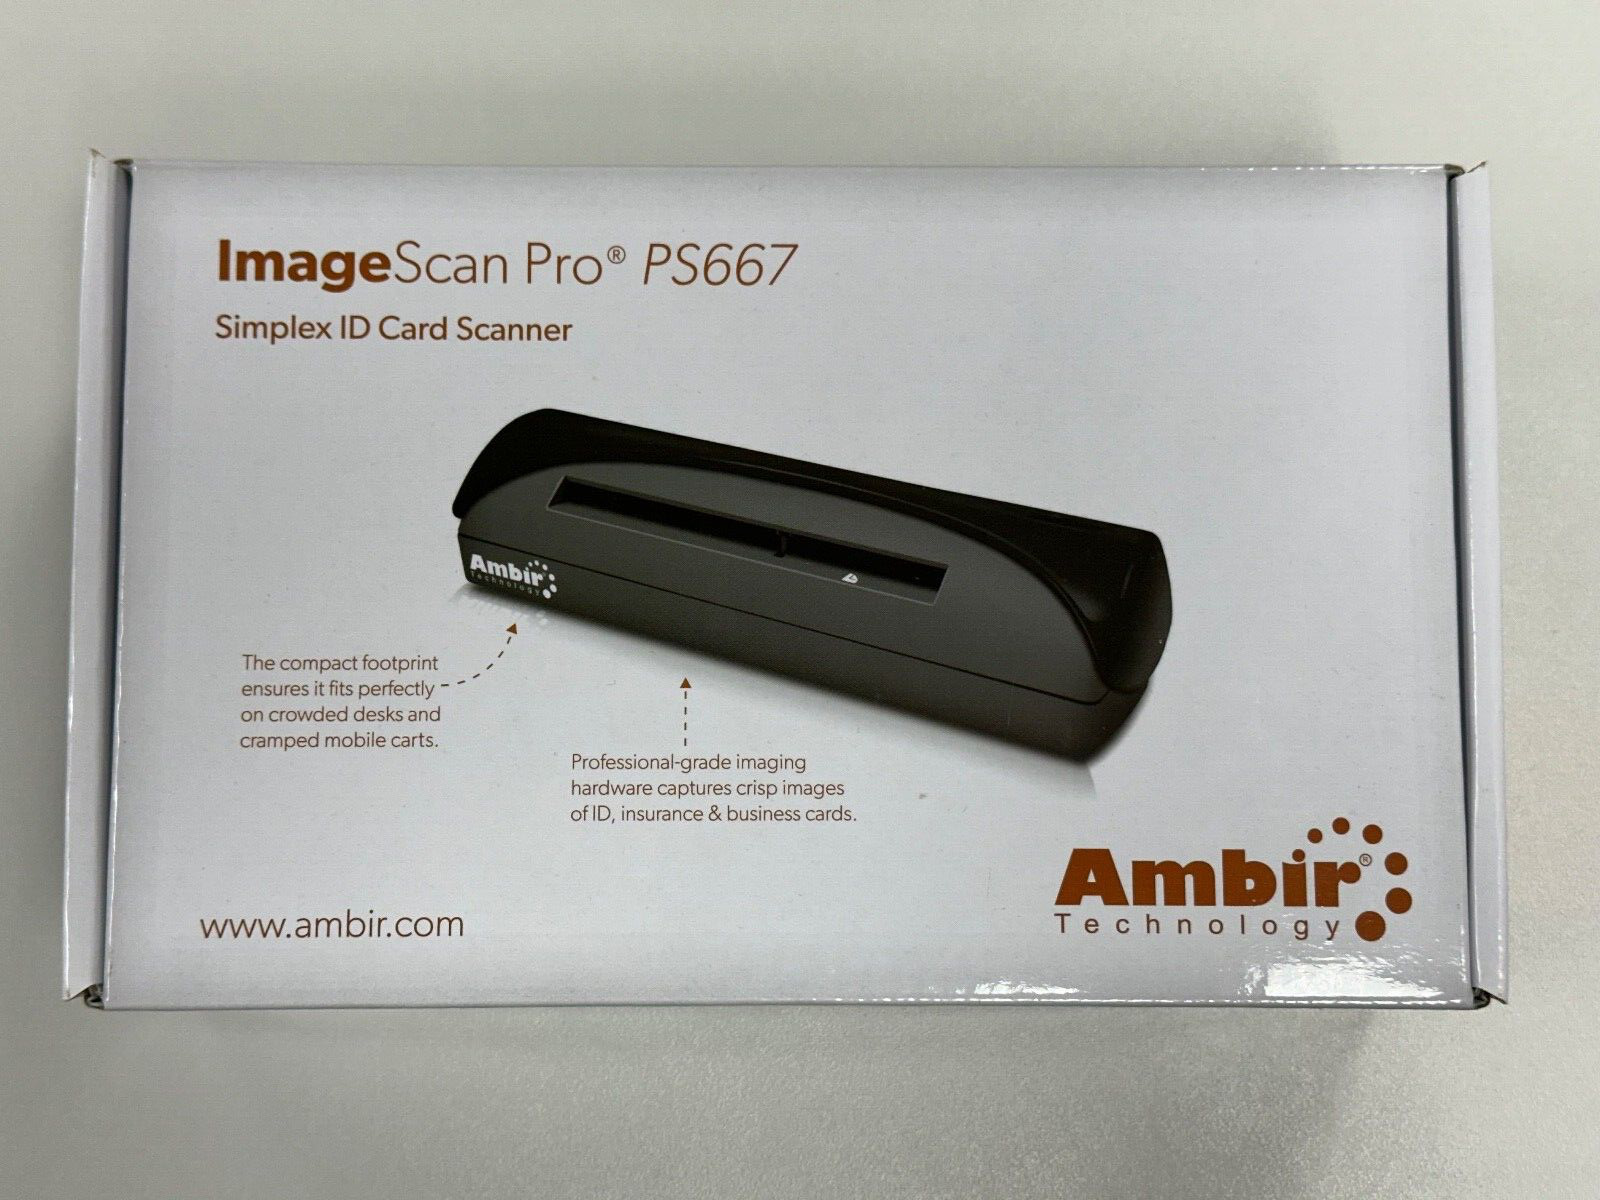 Ambir ImageScan Pro PS667 Simplex ID Card Scanner